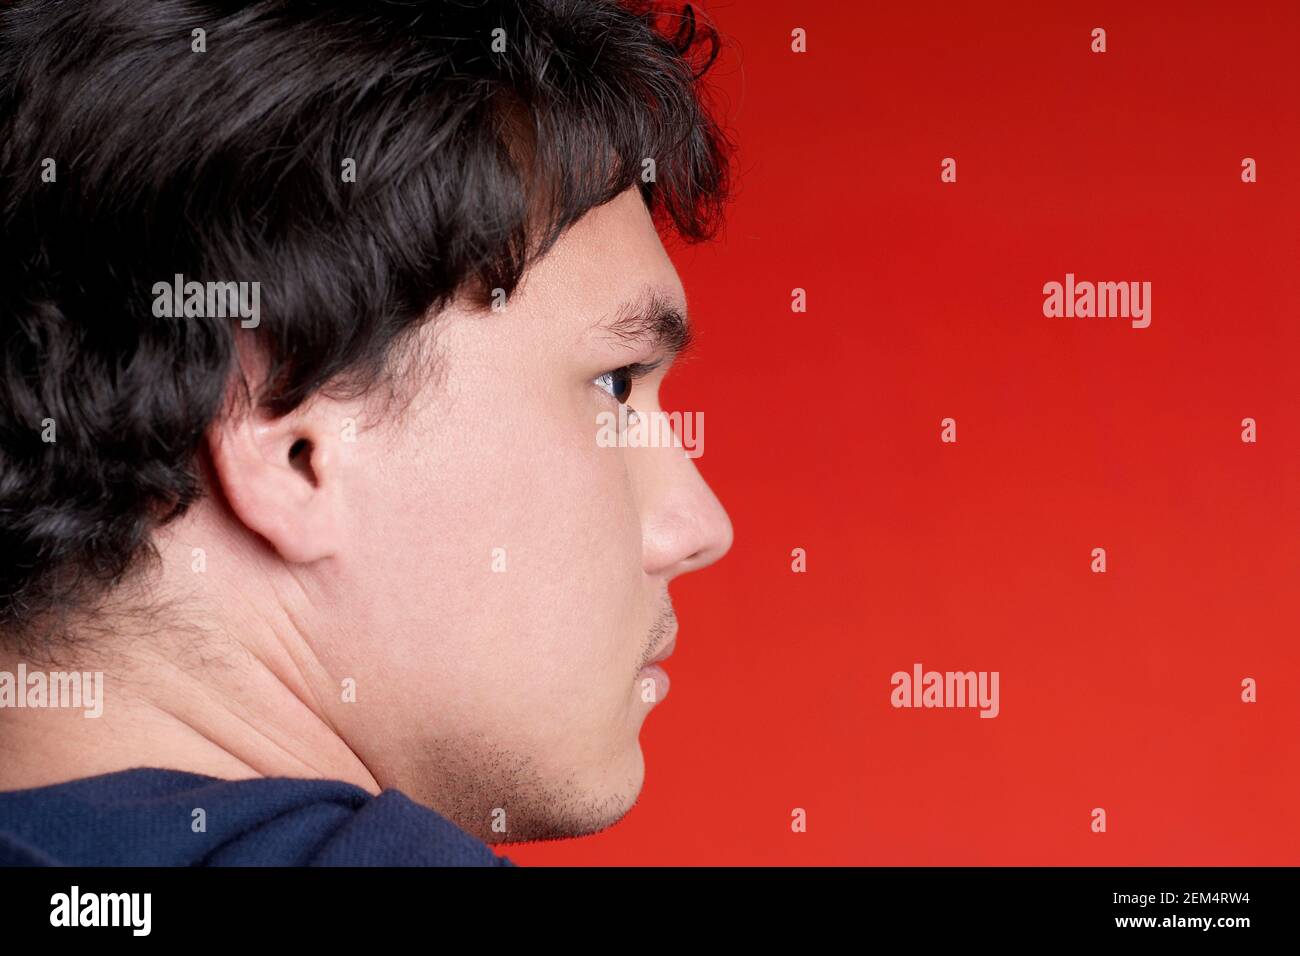 Rear view of a young man looking away Stock Photo